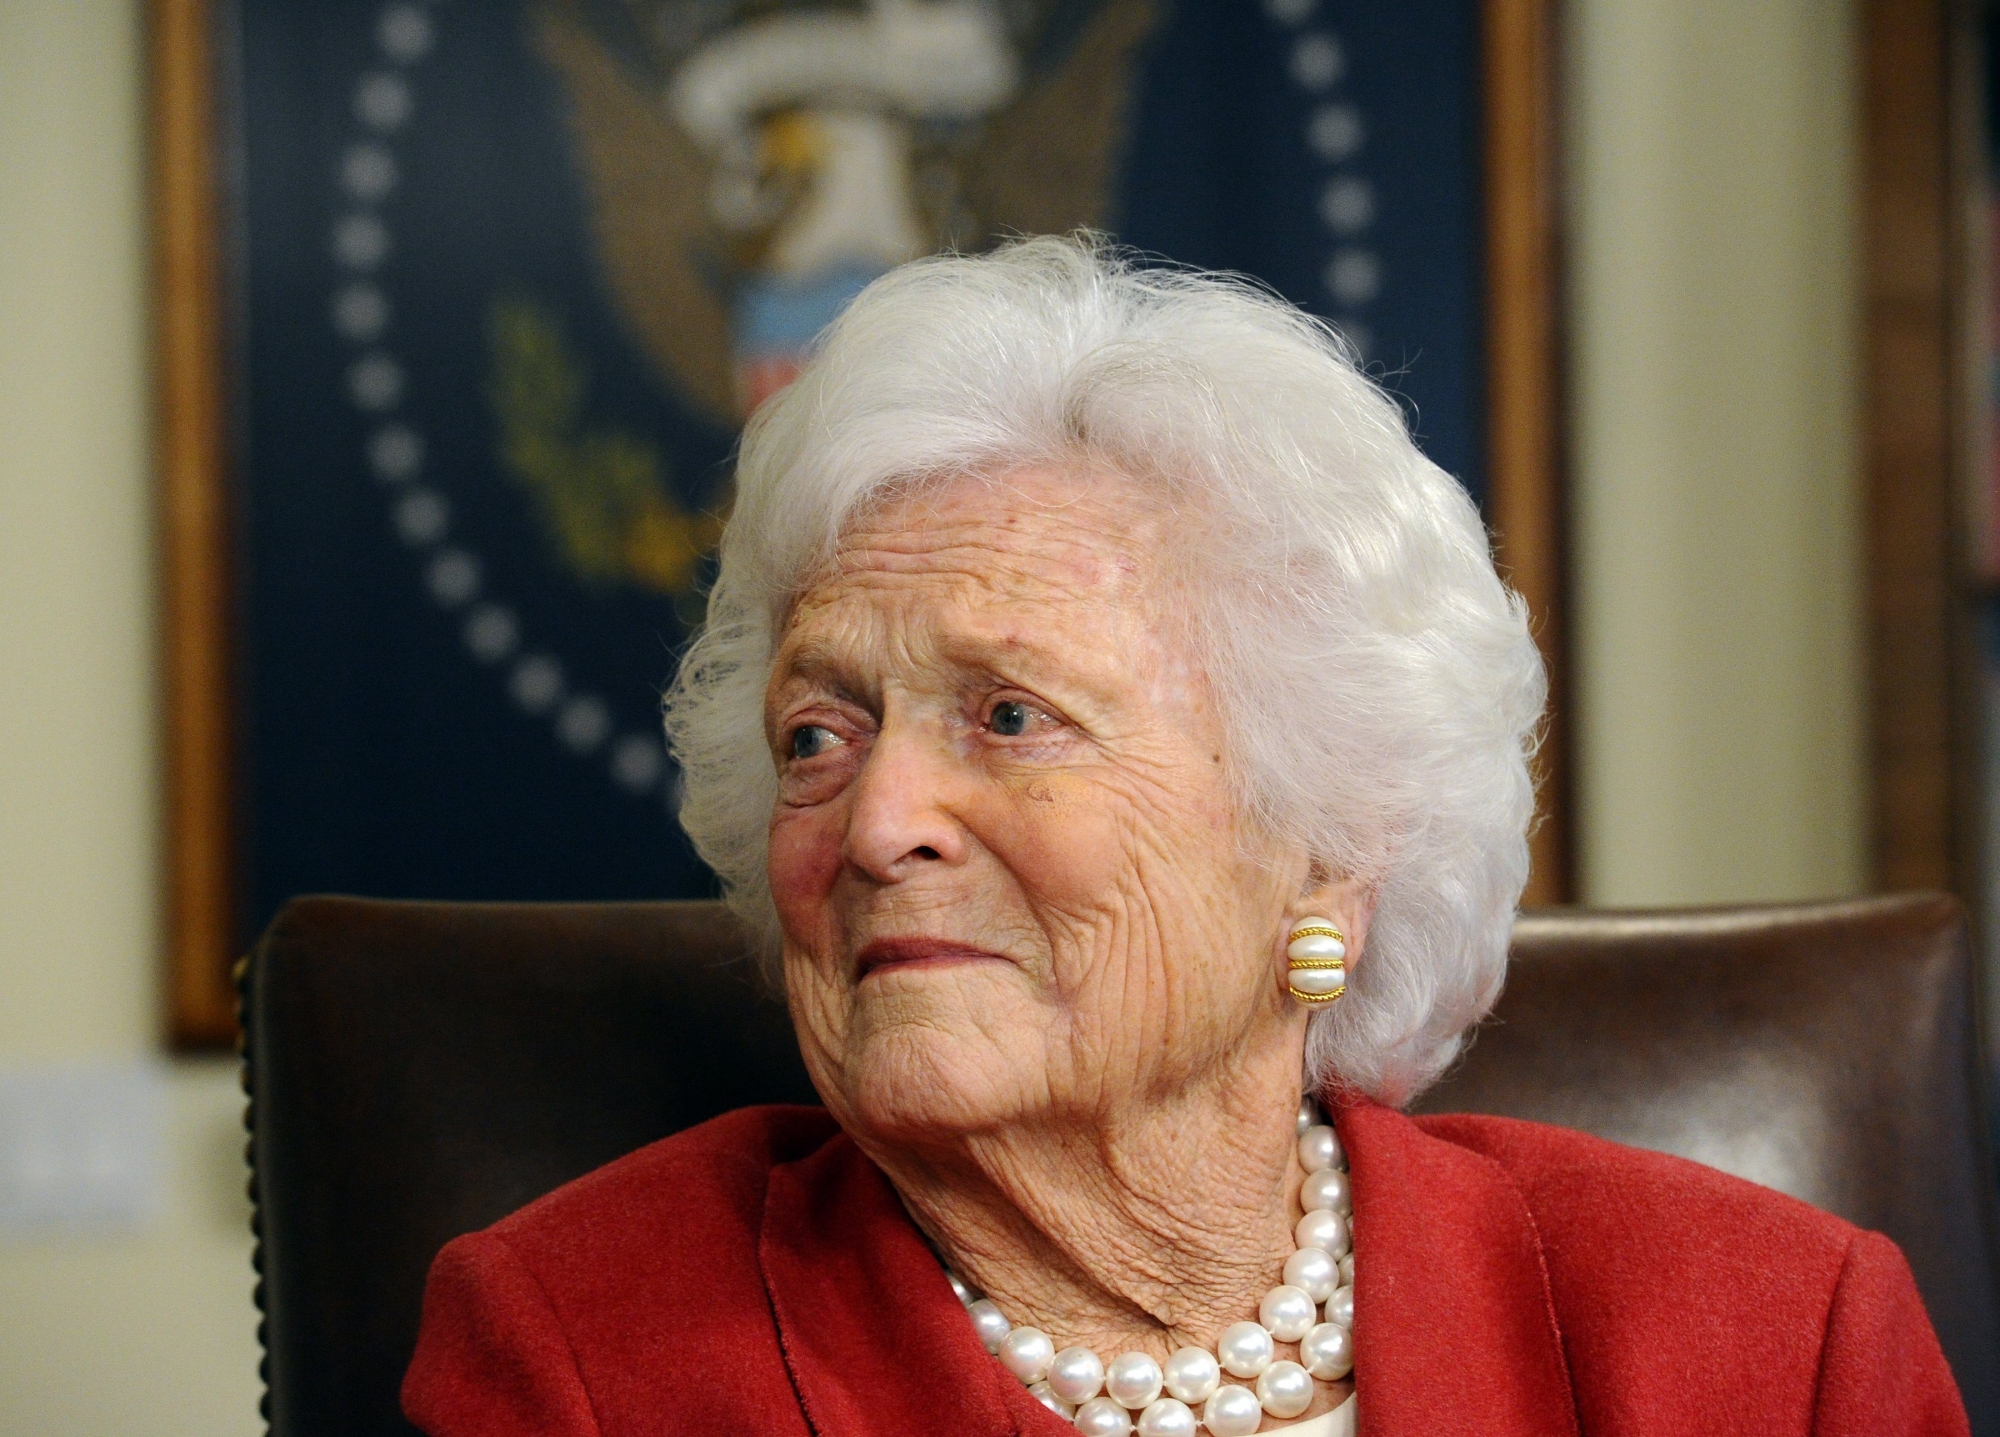 epa06675879 (FILE) Former First Ladey Barbara Bush and wife of Former President George H.W. Bush in his office in Houston, Texas, USA, 29 March 2012 (reissued 18 April 2018). According to media reports, Barbara Bush has died at the age of 92 on 17 April 2018.  EPA/LARRY W. SMITH (FILE) USA BARBARA BUSH OBIT